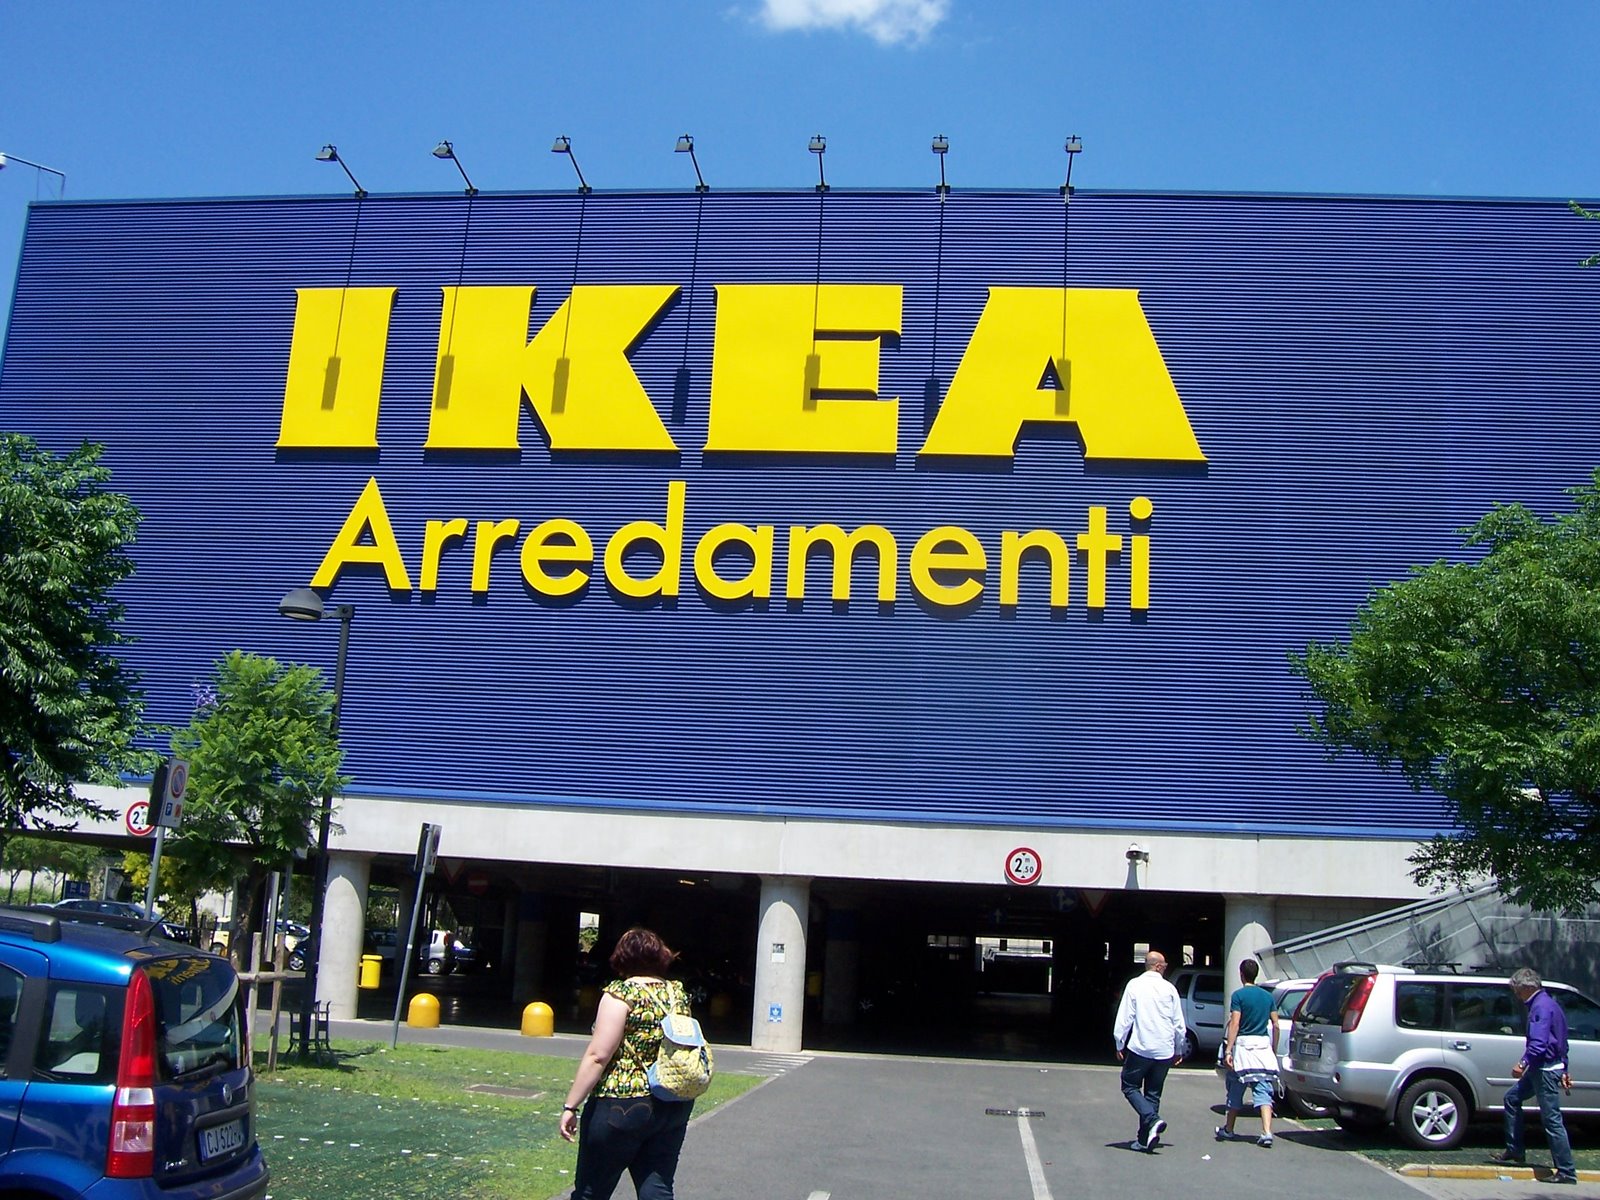 Our first European Ikea in Anagnina?